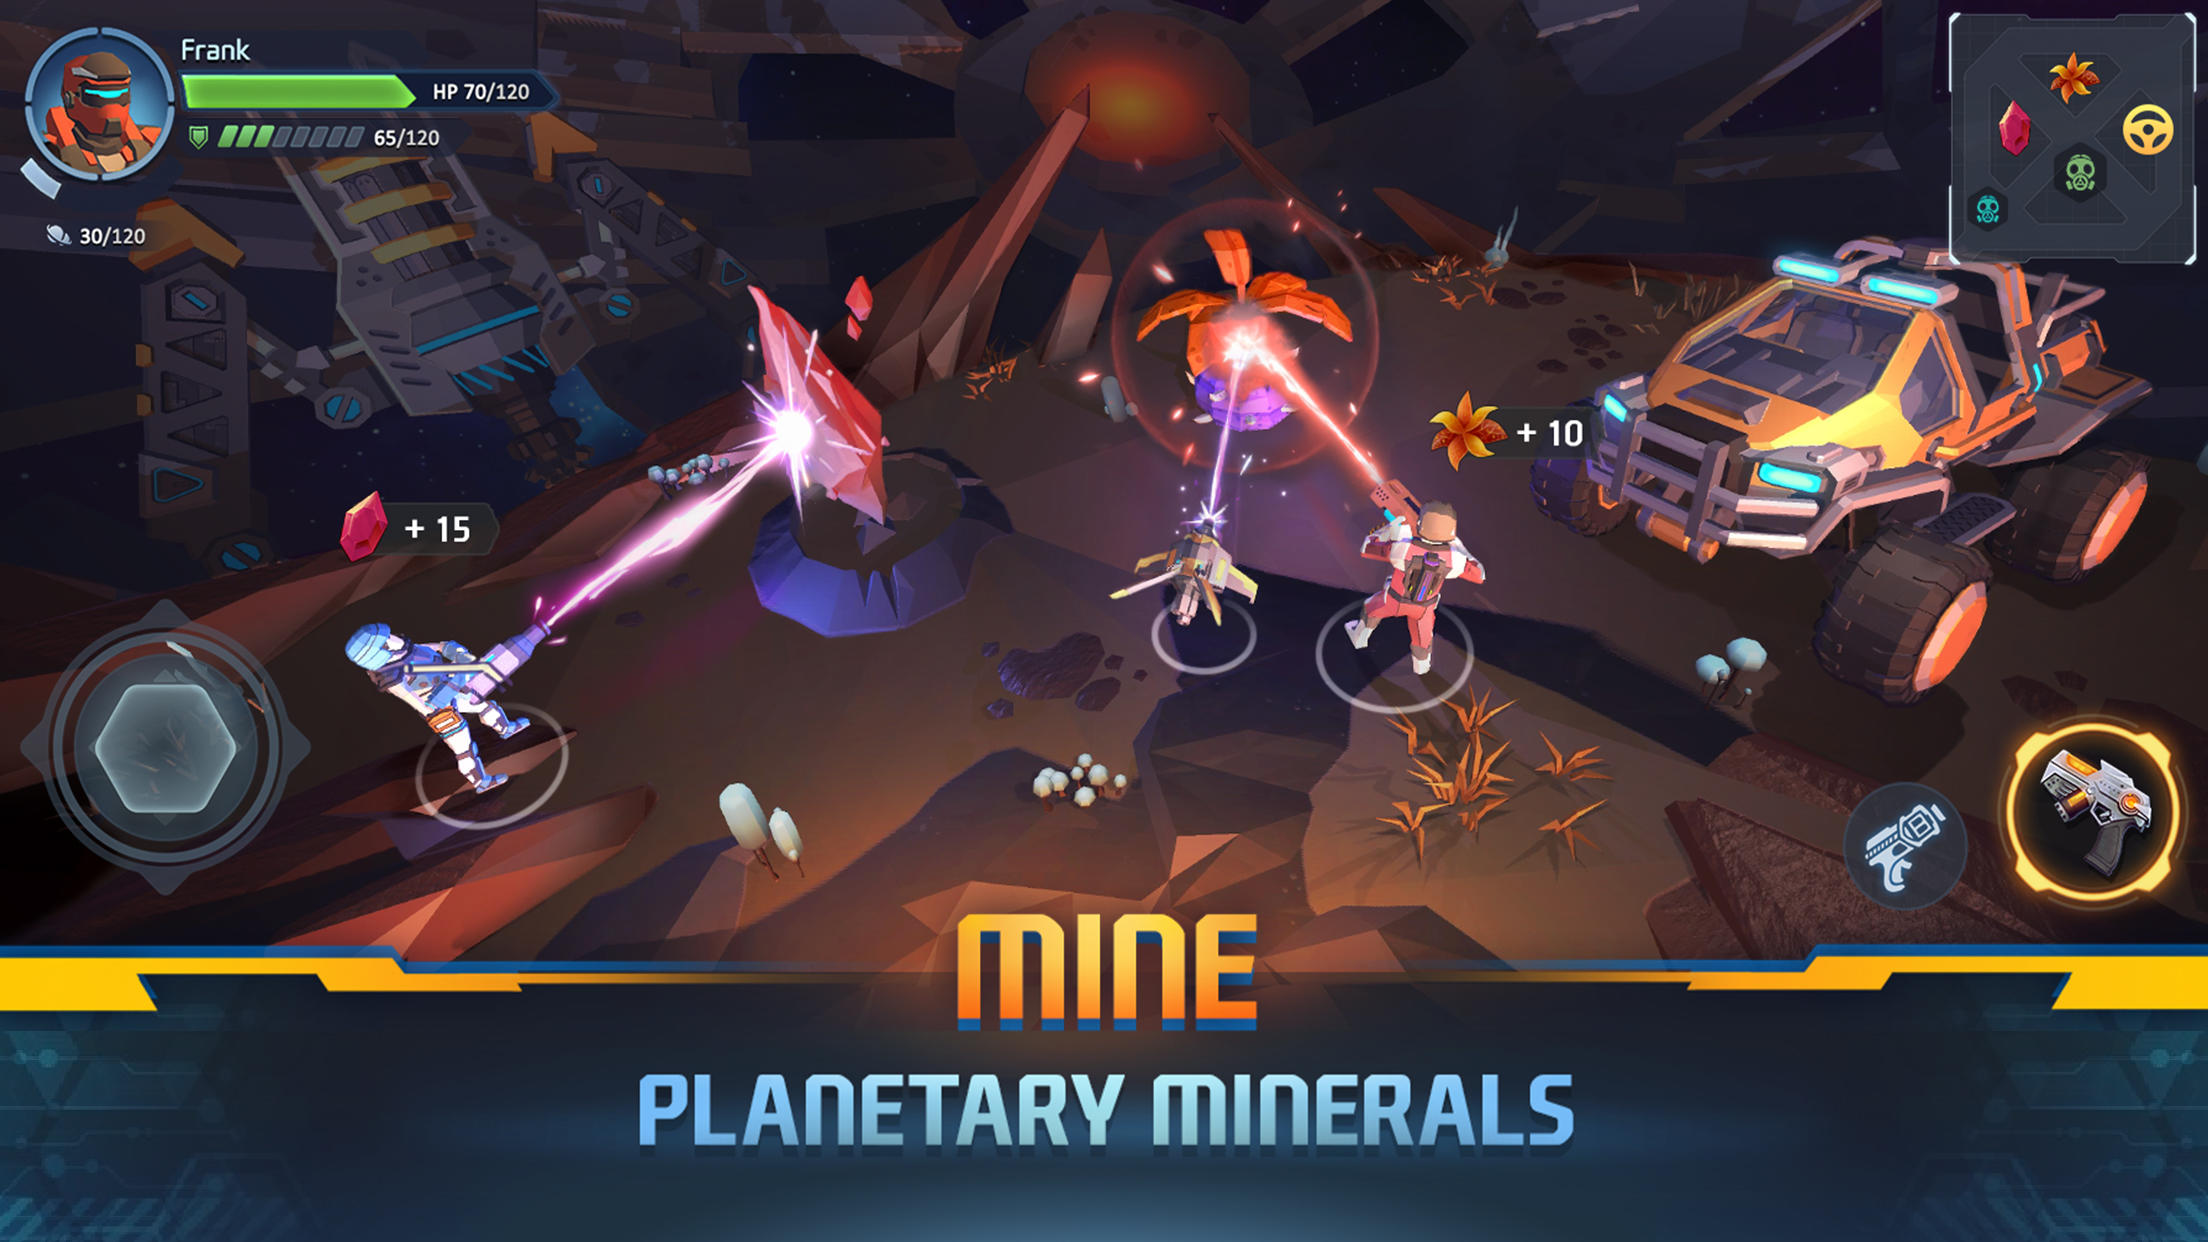 Alien Invasion: RPG Idle Space - Apps on Google Play